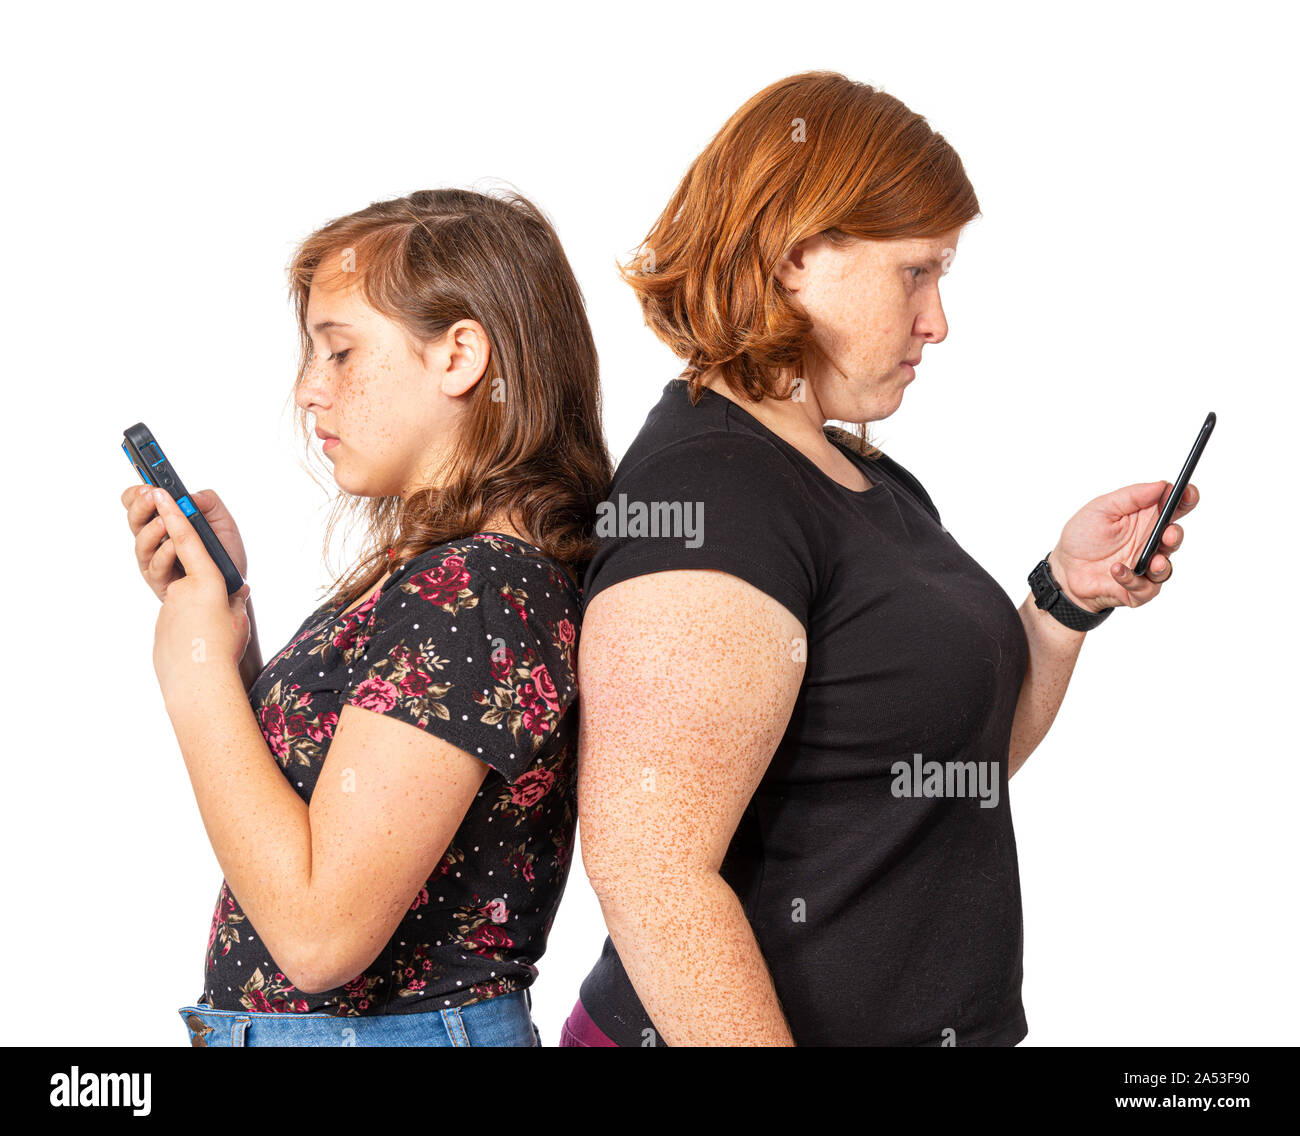 Horizontal studio shot of a mother and daughter leaning back to back each using her own cell phone.  White background. Stock Photo